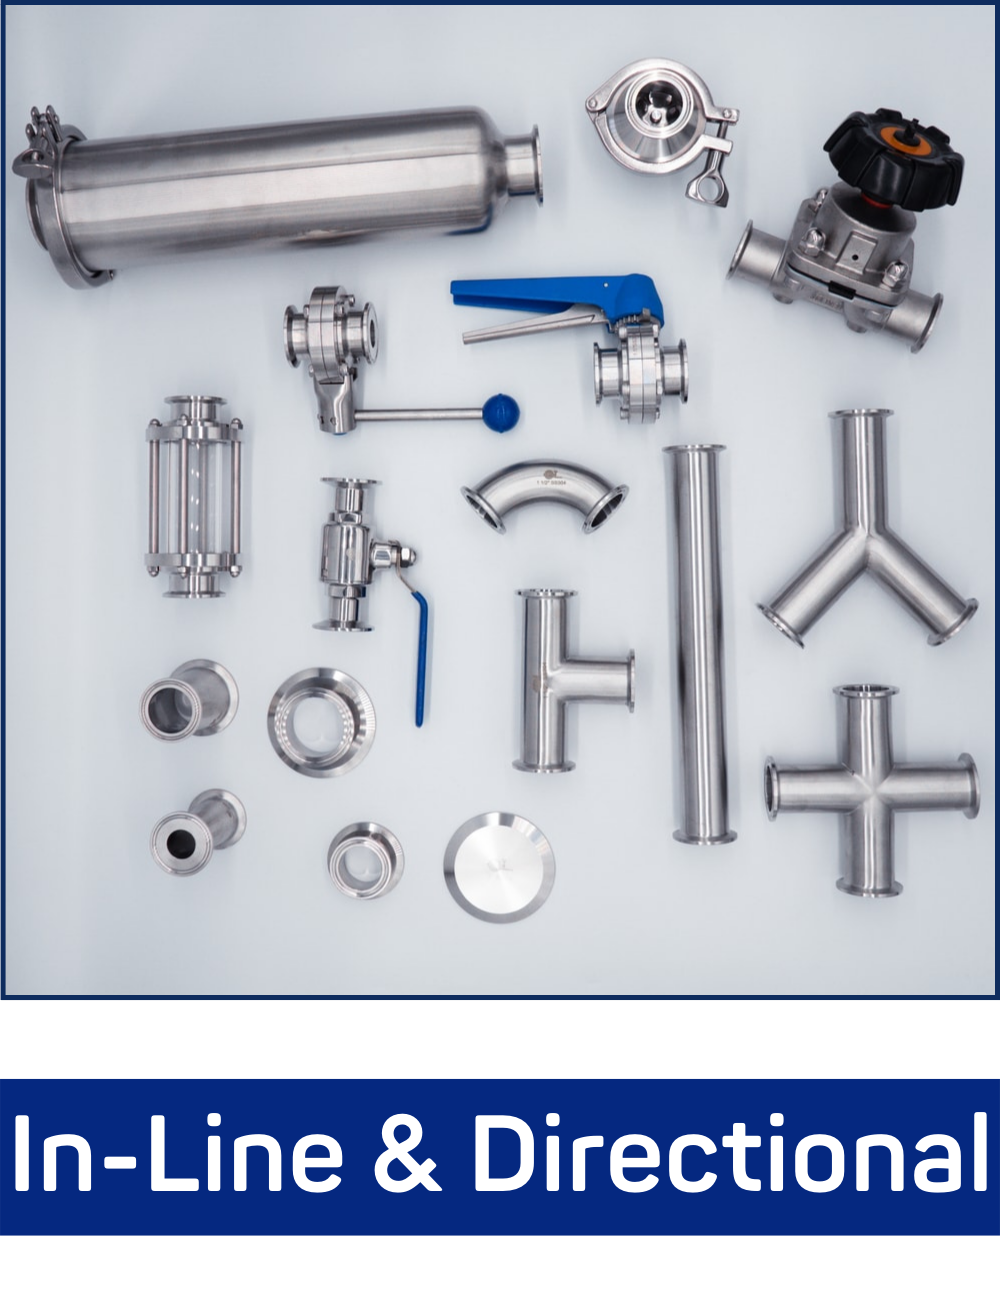 Stainless Steel In-Line and Directional Fittings